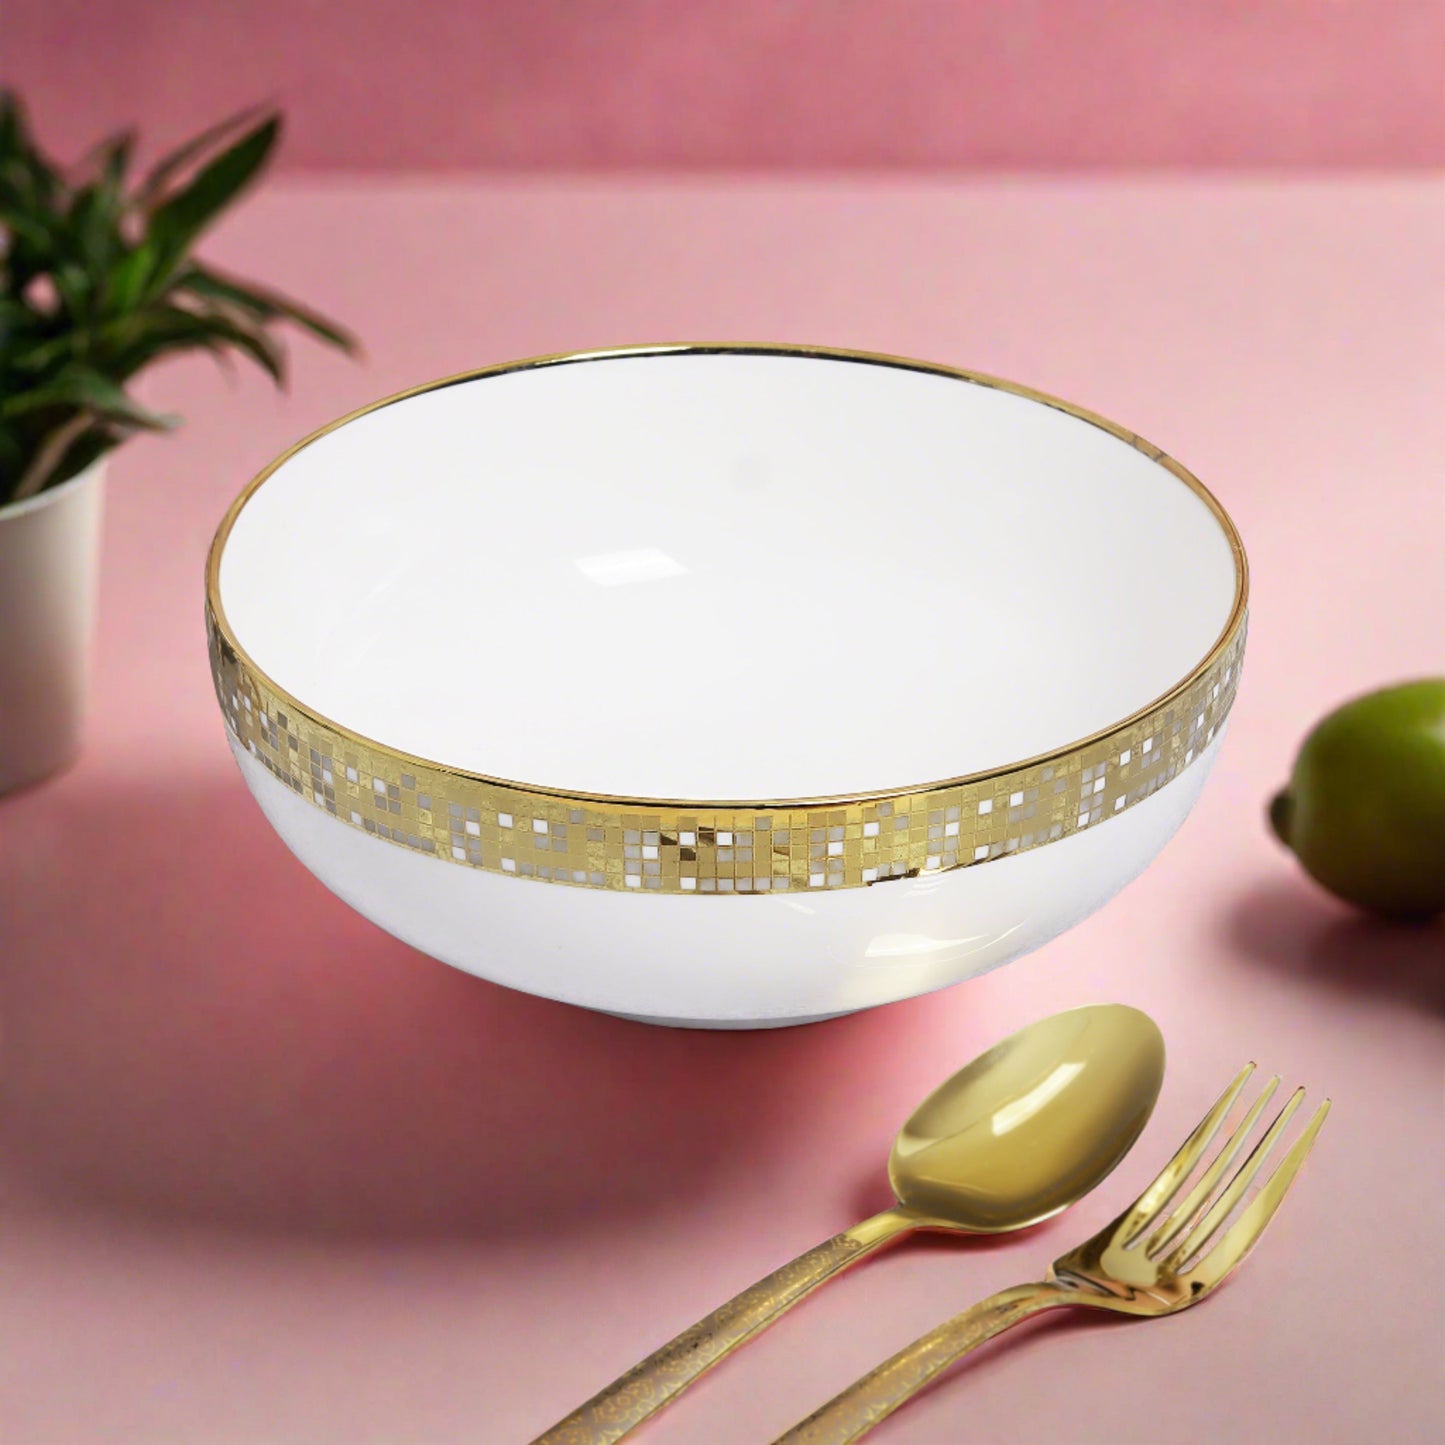 Large ceramic serving bowl, perfect for salads or side dishes - a functional and elegant addition to your table.